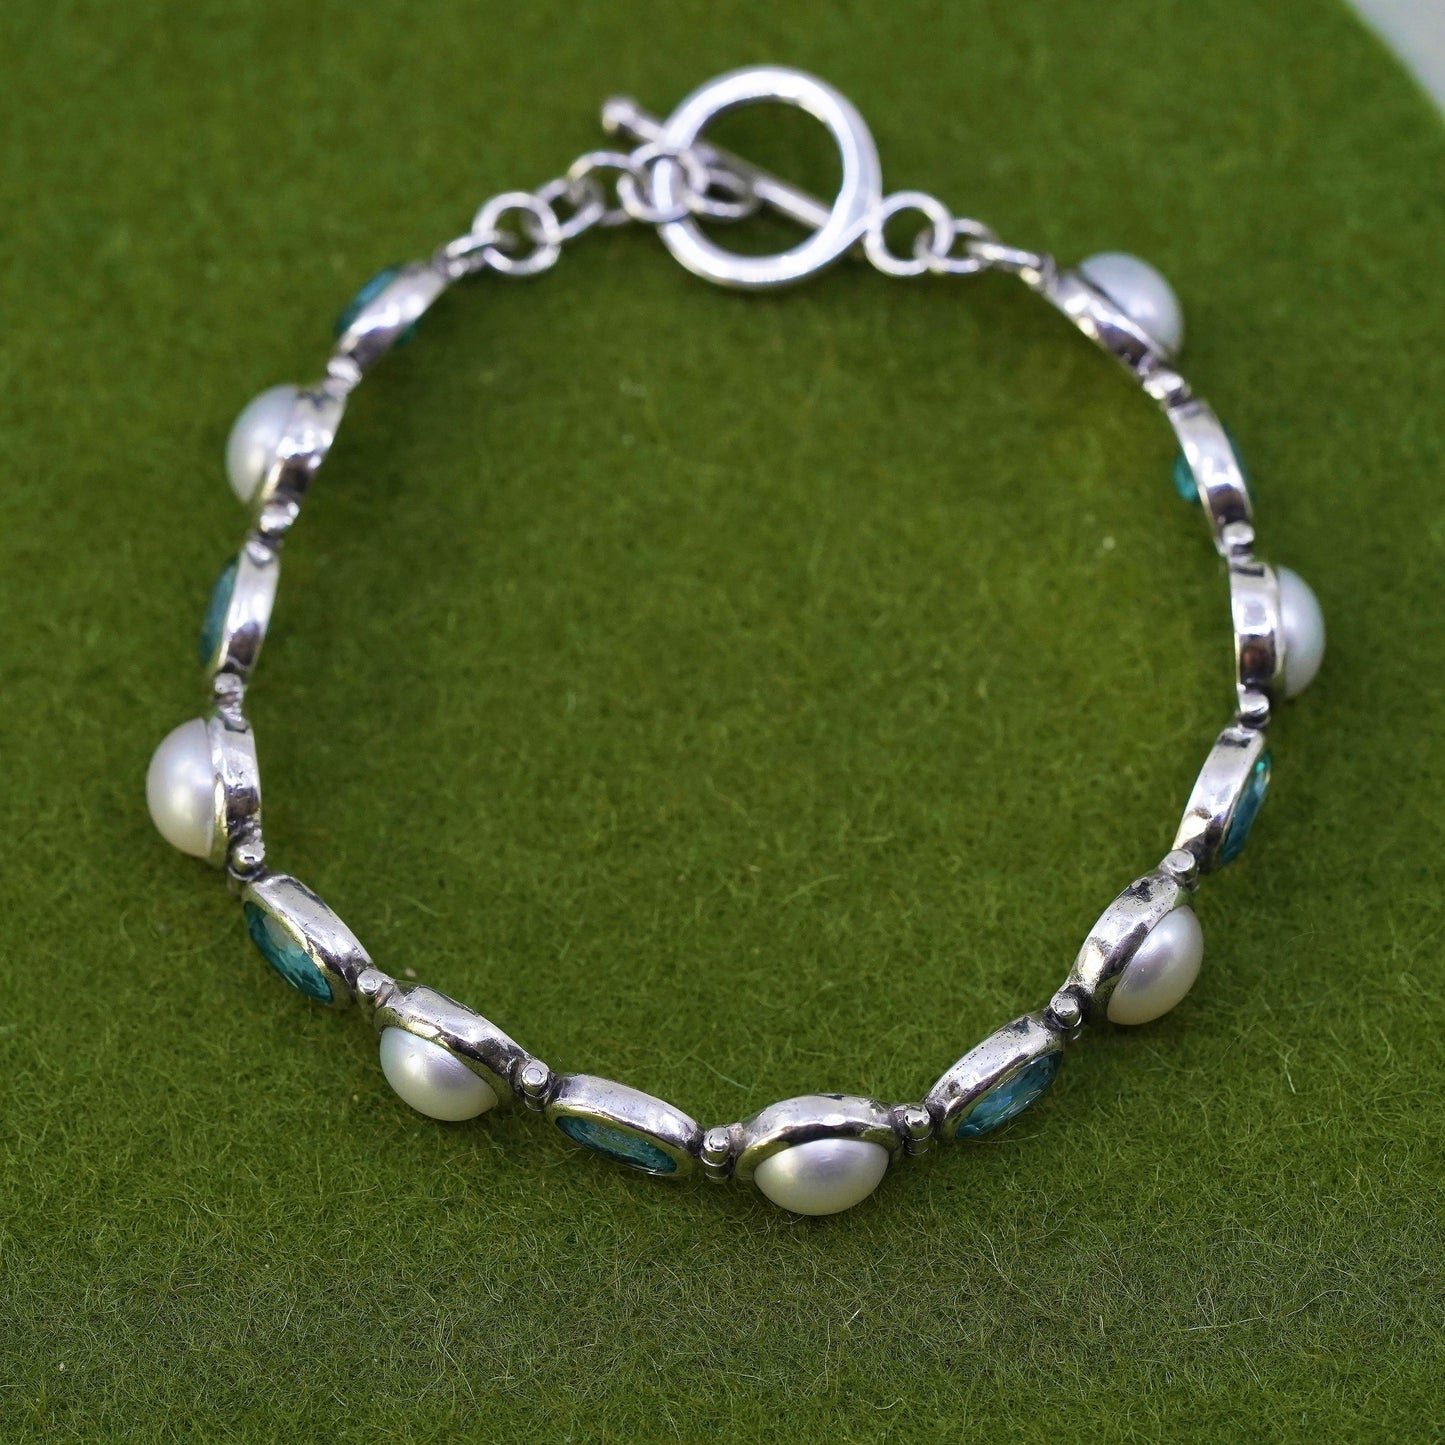 6.75", Vintage JCD Sterling silver tennis bracelet, 925 chain with topaz pearl